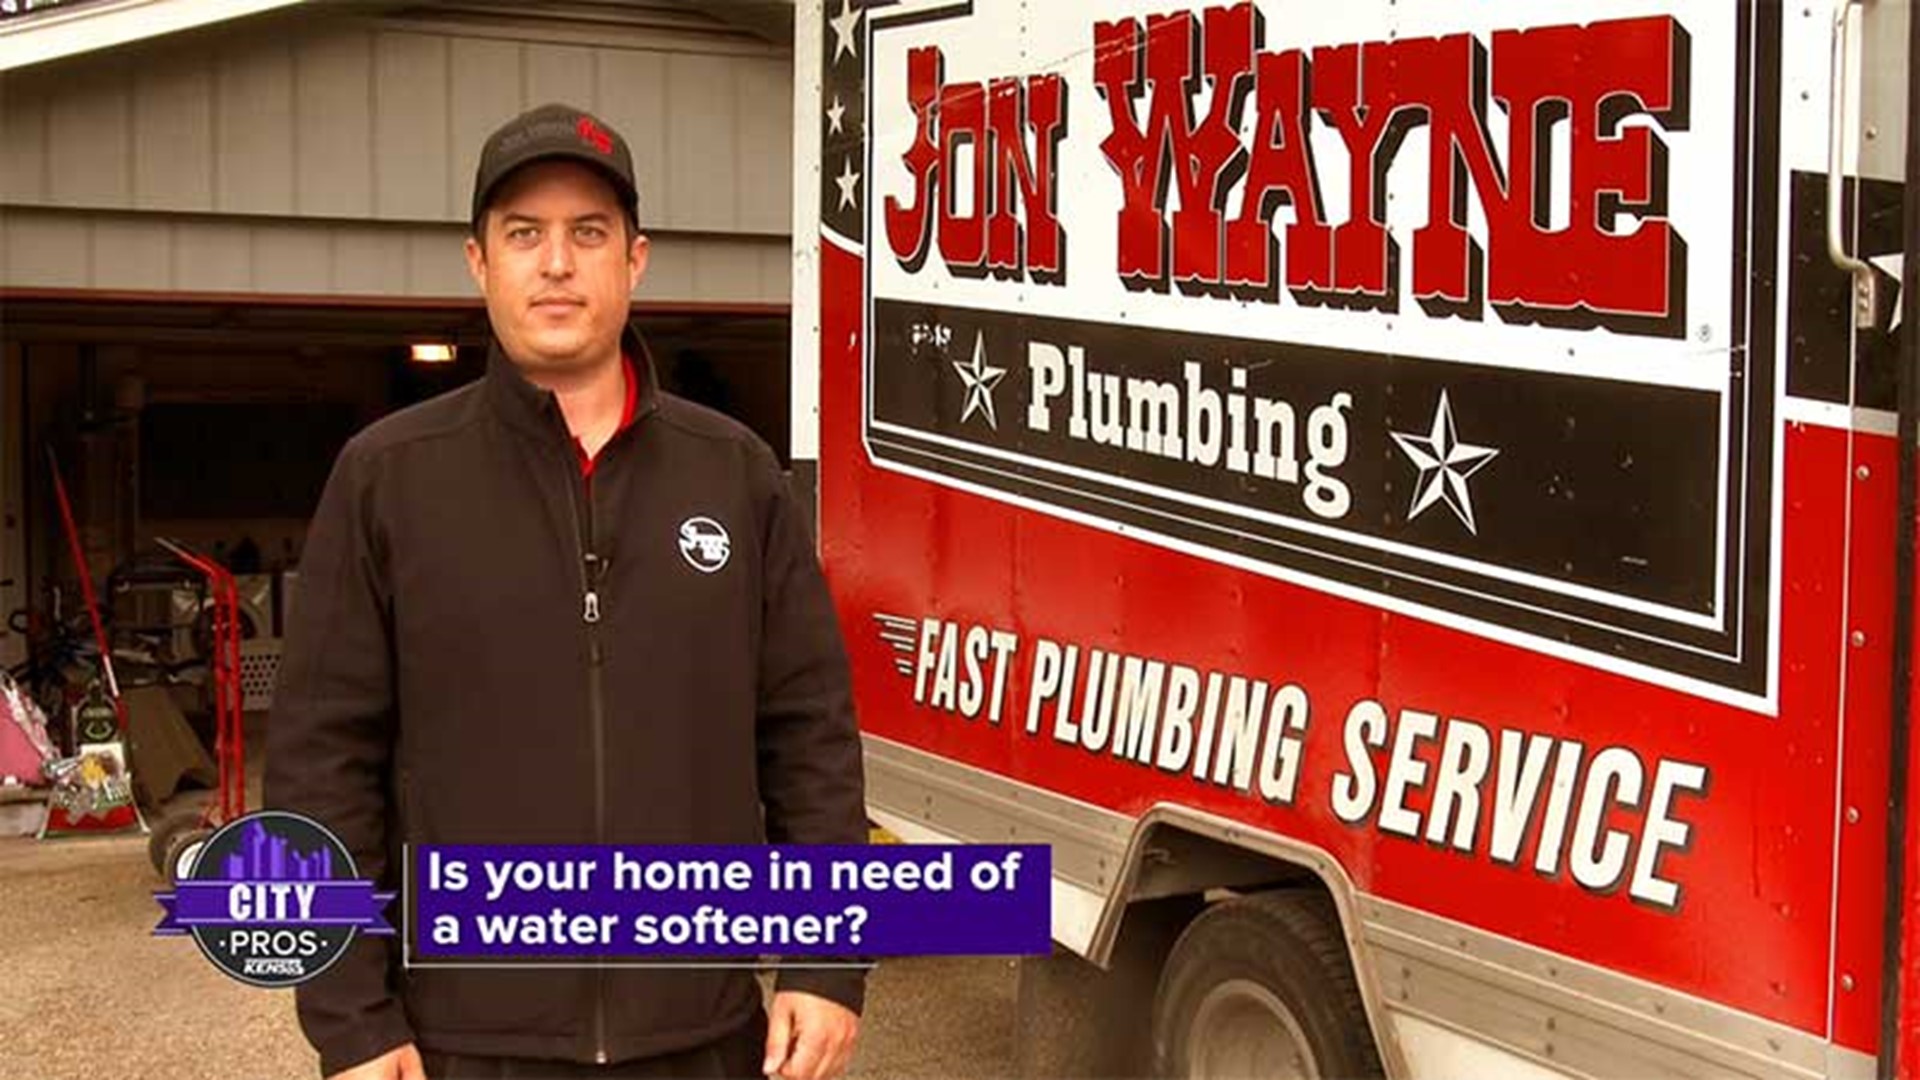 Jon Wayne can install a water softener to help you address water hardness and excessive chlorine levels.